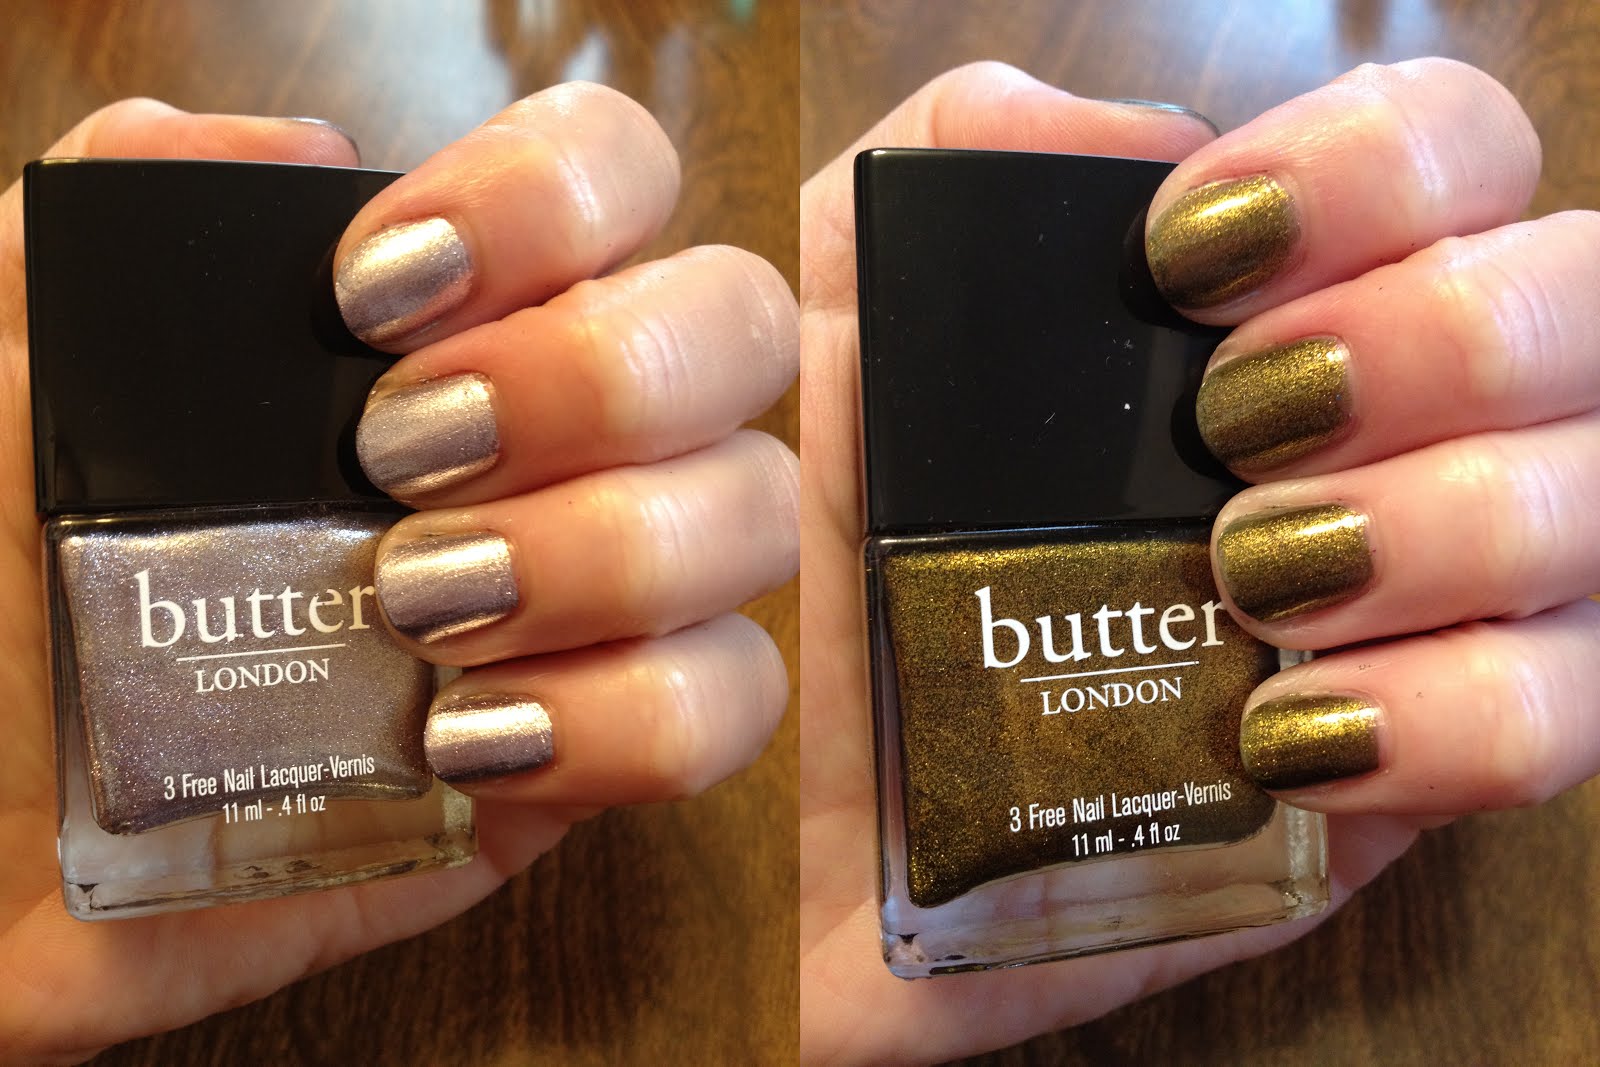 Butter London Nail Lacquer in "Teddy Girl" - wide 7